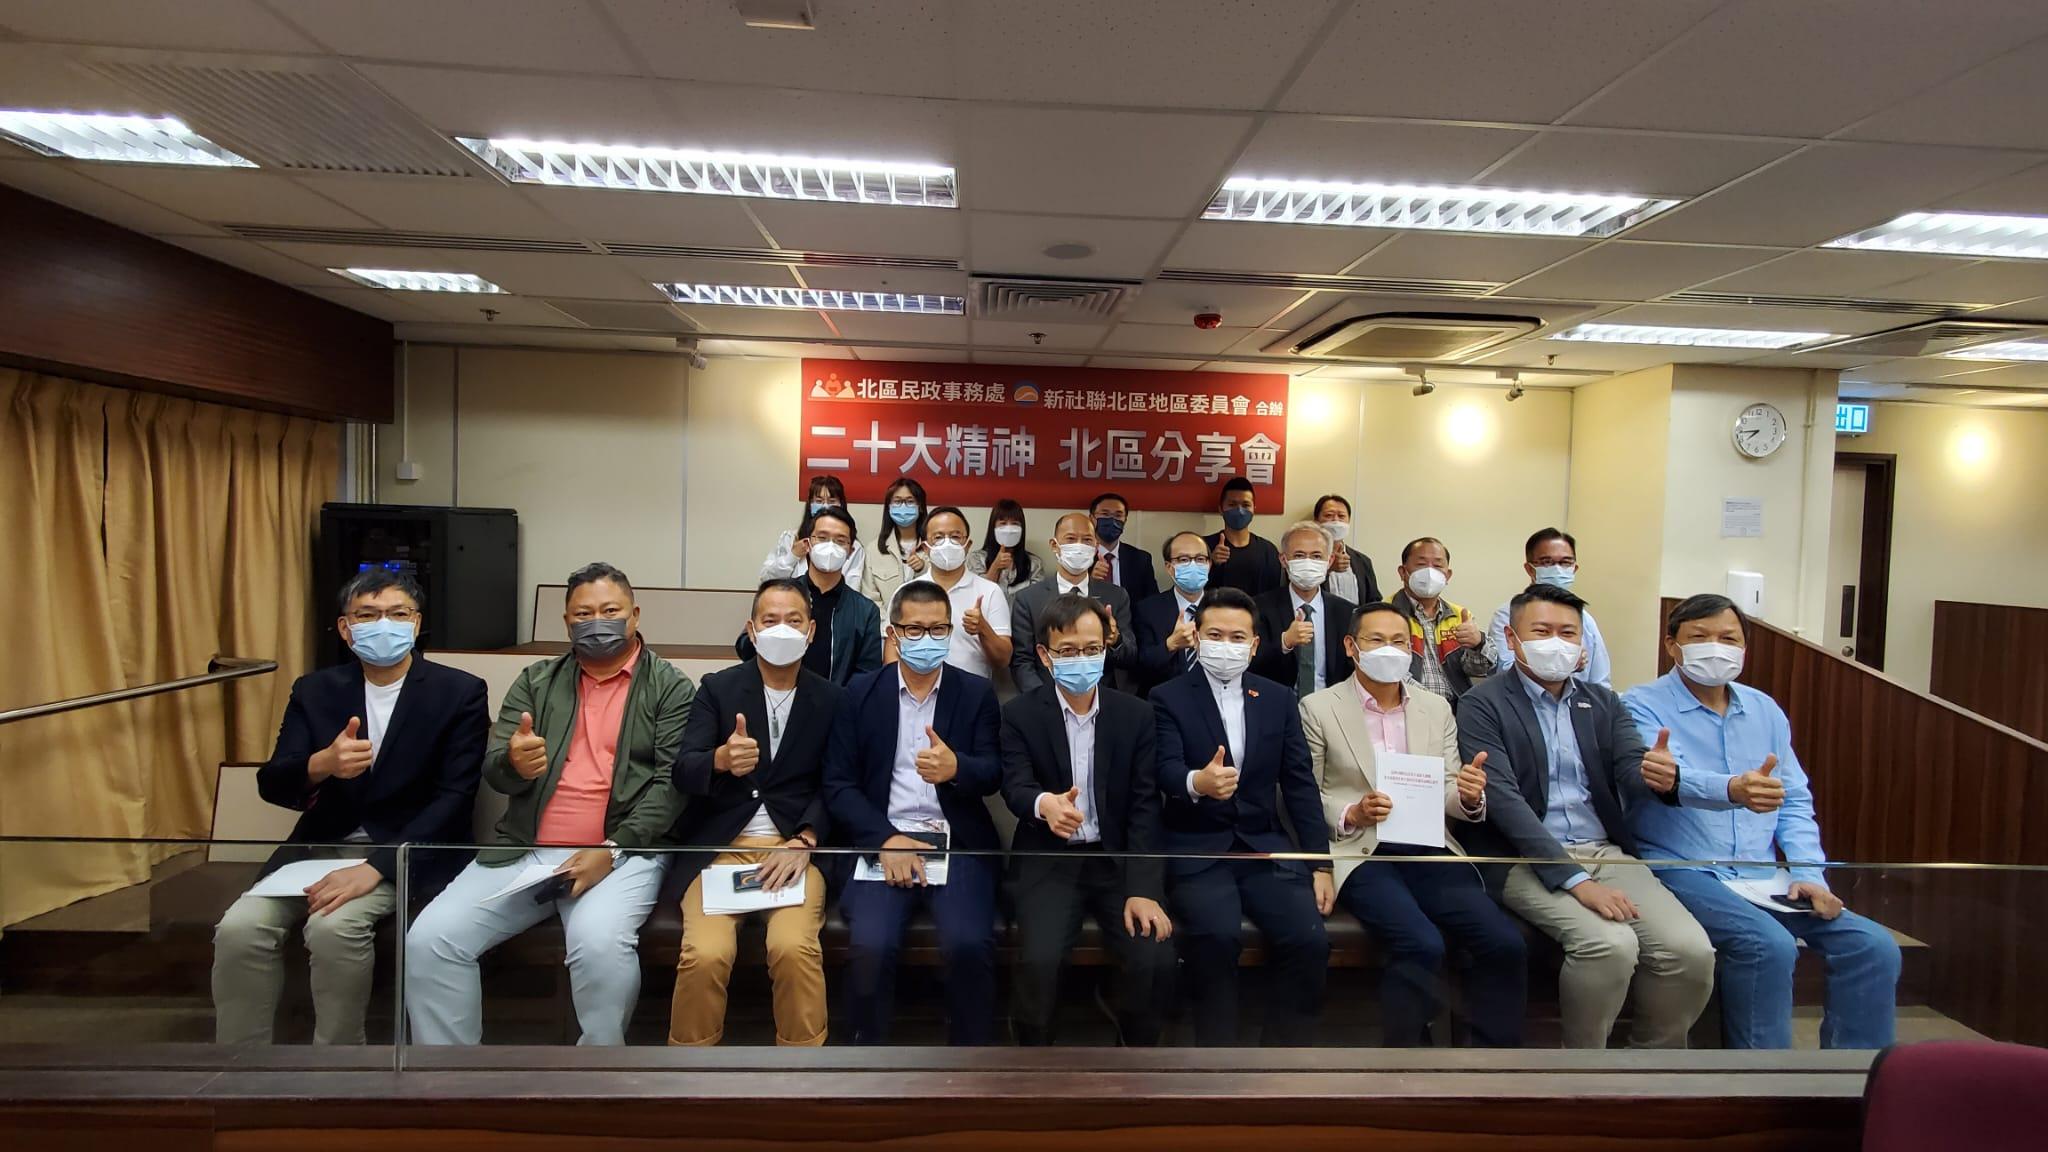 The North District Office (NDO), together with the New Territories Association of Societies, North District Committee, held a session on "Essence of the 20th National Congress of the CPC" at North District Office conference room today (October 31). Photo shows members of the committees formed by the NDO as well as the representatives from Sheung Shui District Rural Committee, Fanling District Rural Committee, Sha Tau Kok District Rural Committee and Ta Kwu Ling District Rural Committee at the session.